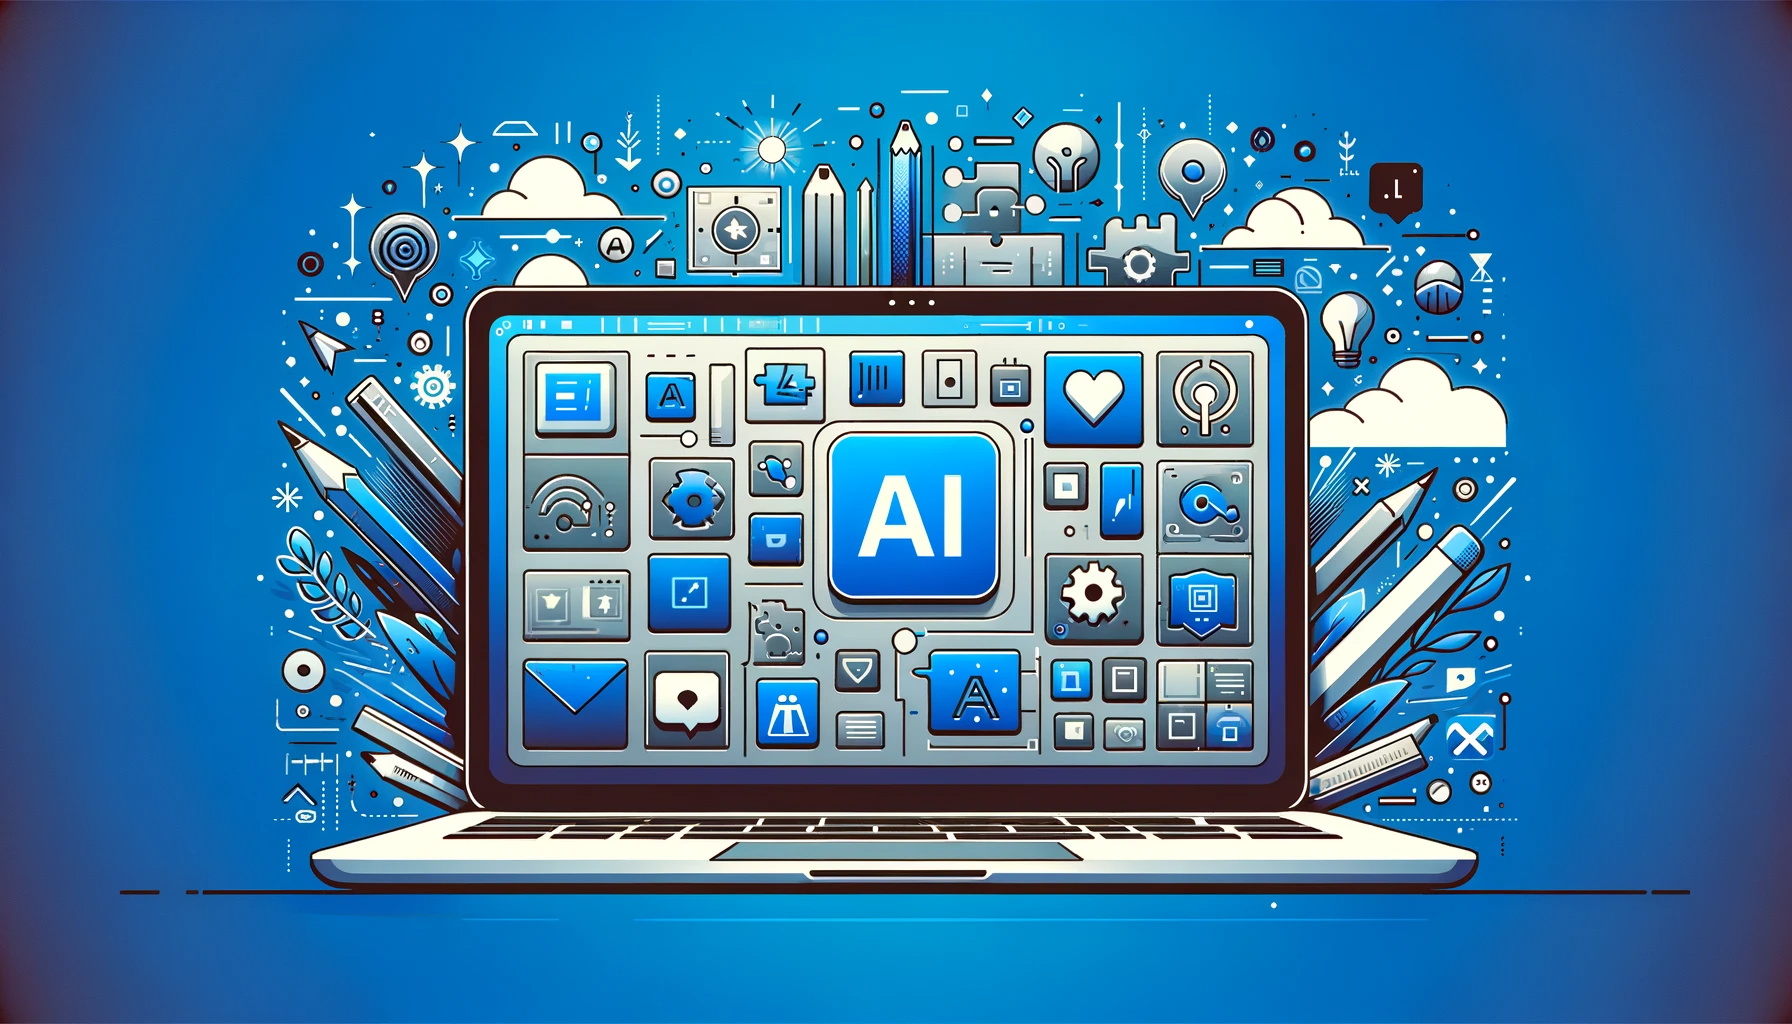 Laptop screen showcasing an array of technology and media icons, all centered around a prominent 'AI' symbol, suggesting a theme of AI integration in various digital aspects.